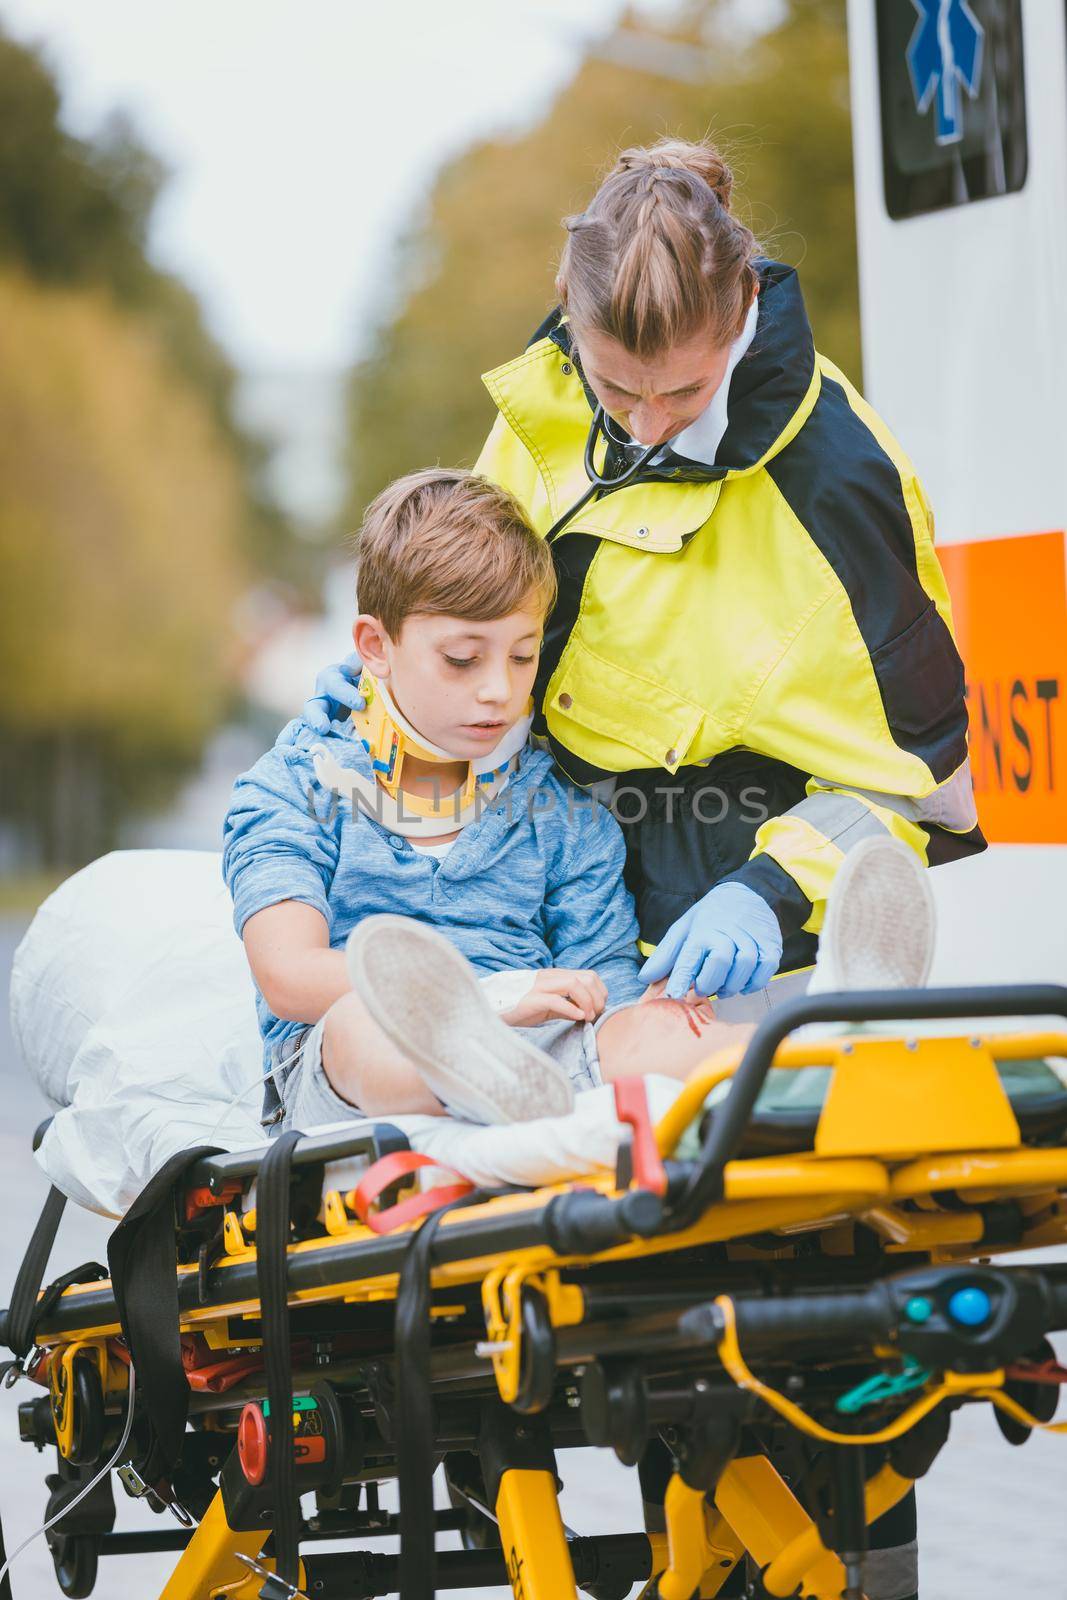 Emergency doctor giving oxygen to accident victim, a child